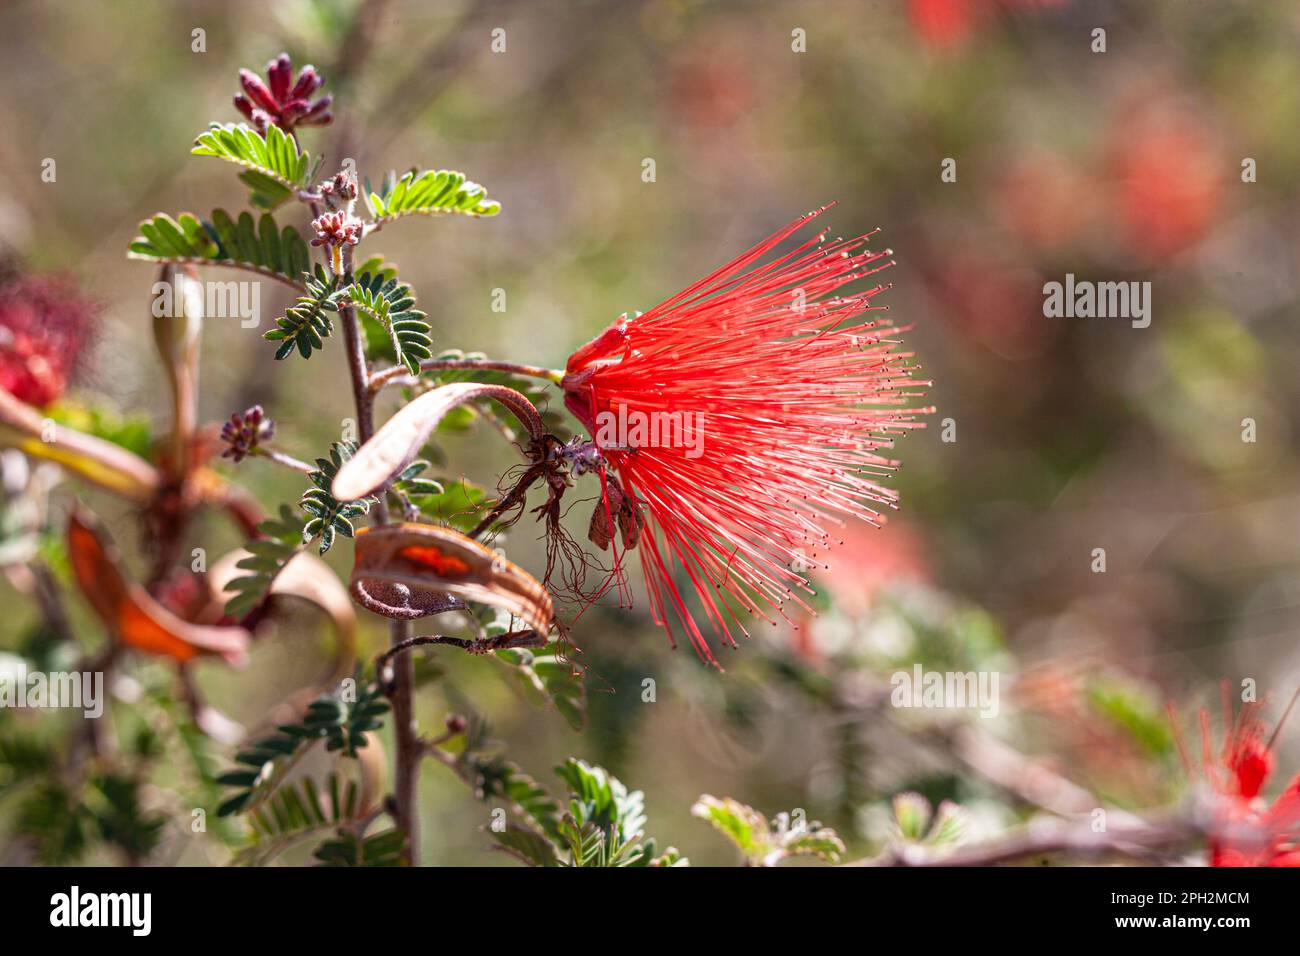 Fairy duster or powder puff plant found in the Mojave desert in Southern California Stock Photo